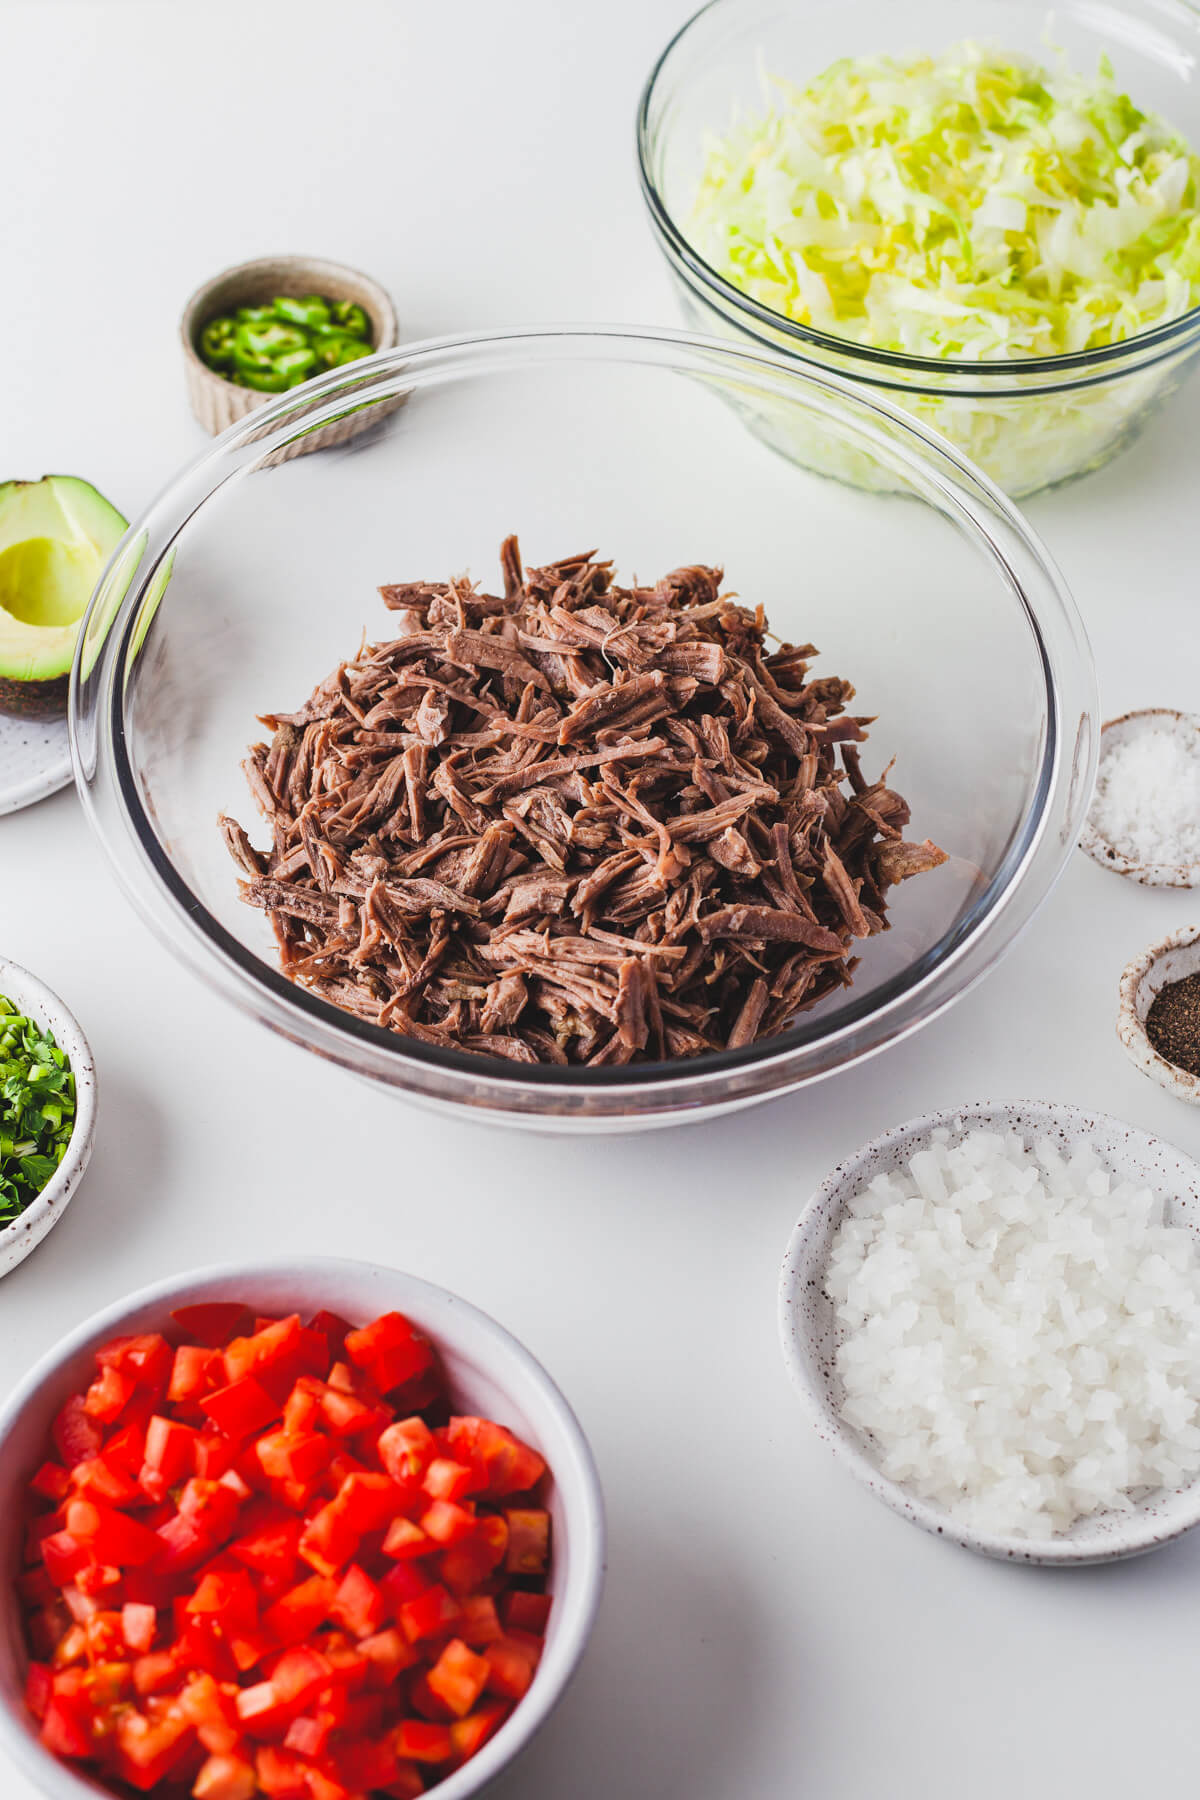 Shredded beef in a clear glass bowl.